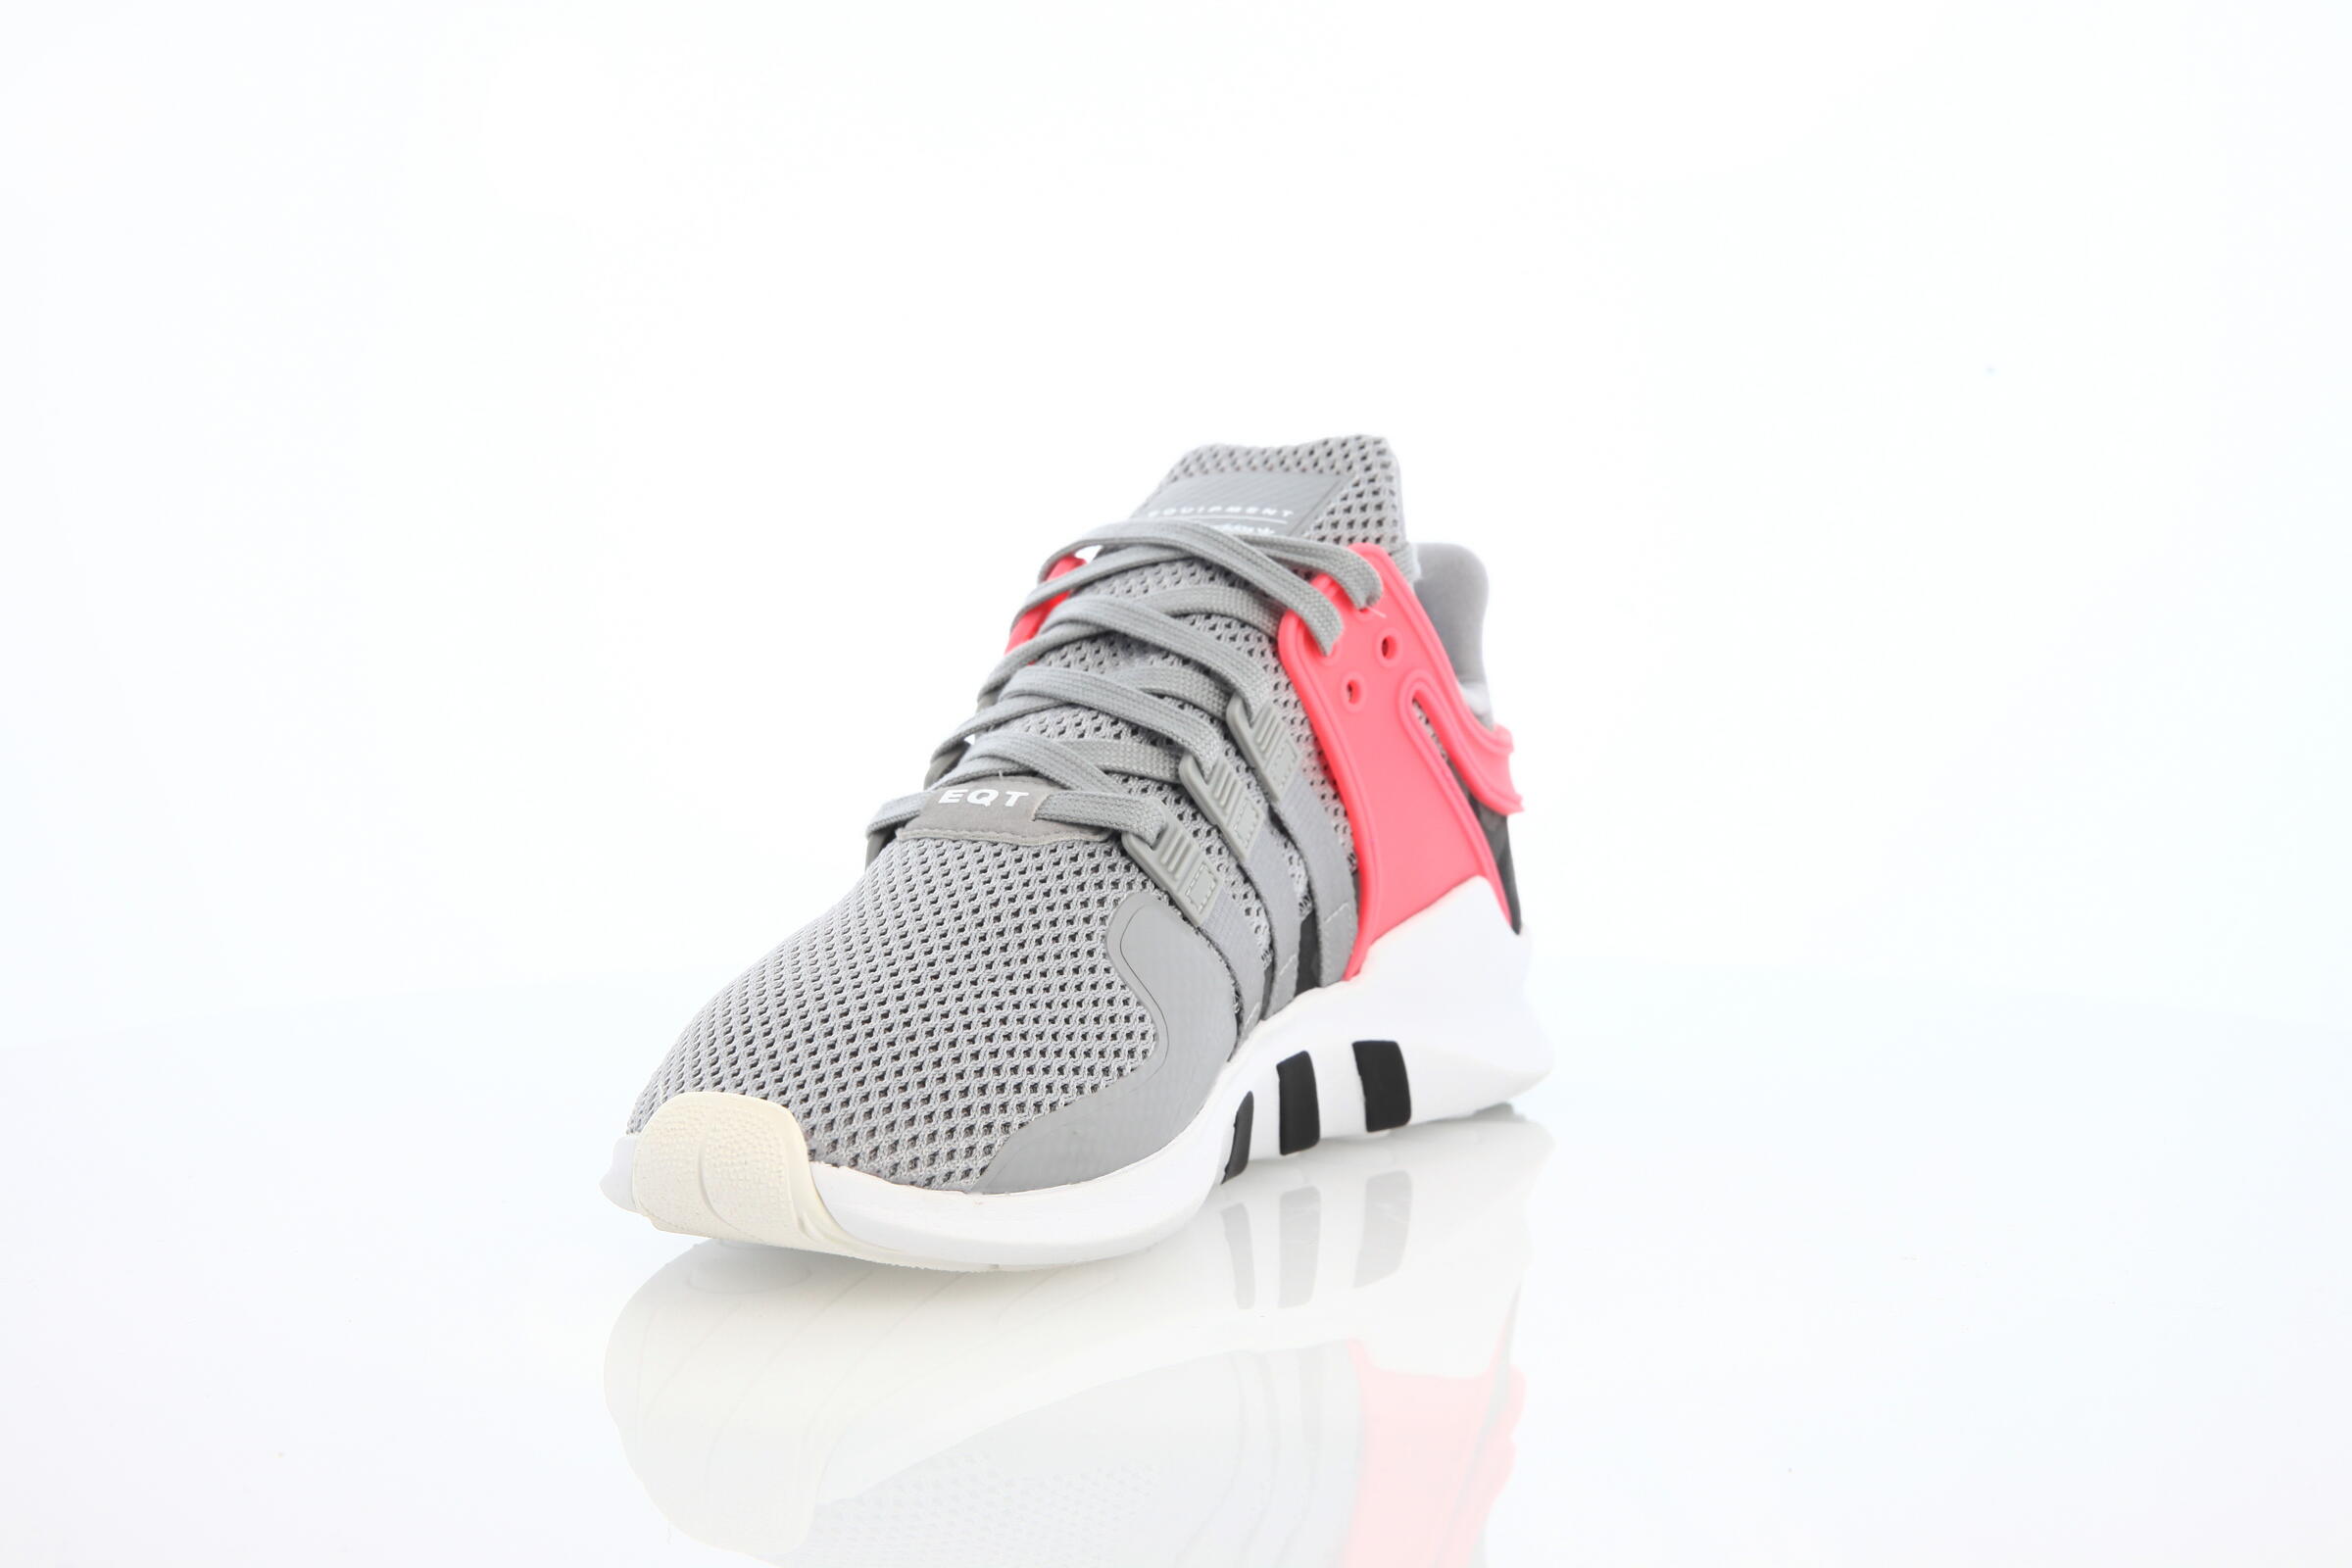 adidas Performance EQT Support Adv "Solid Grey"